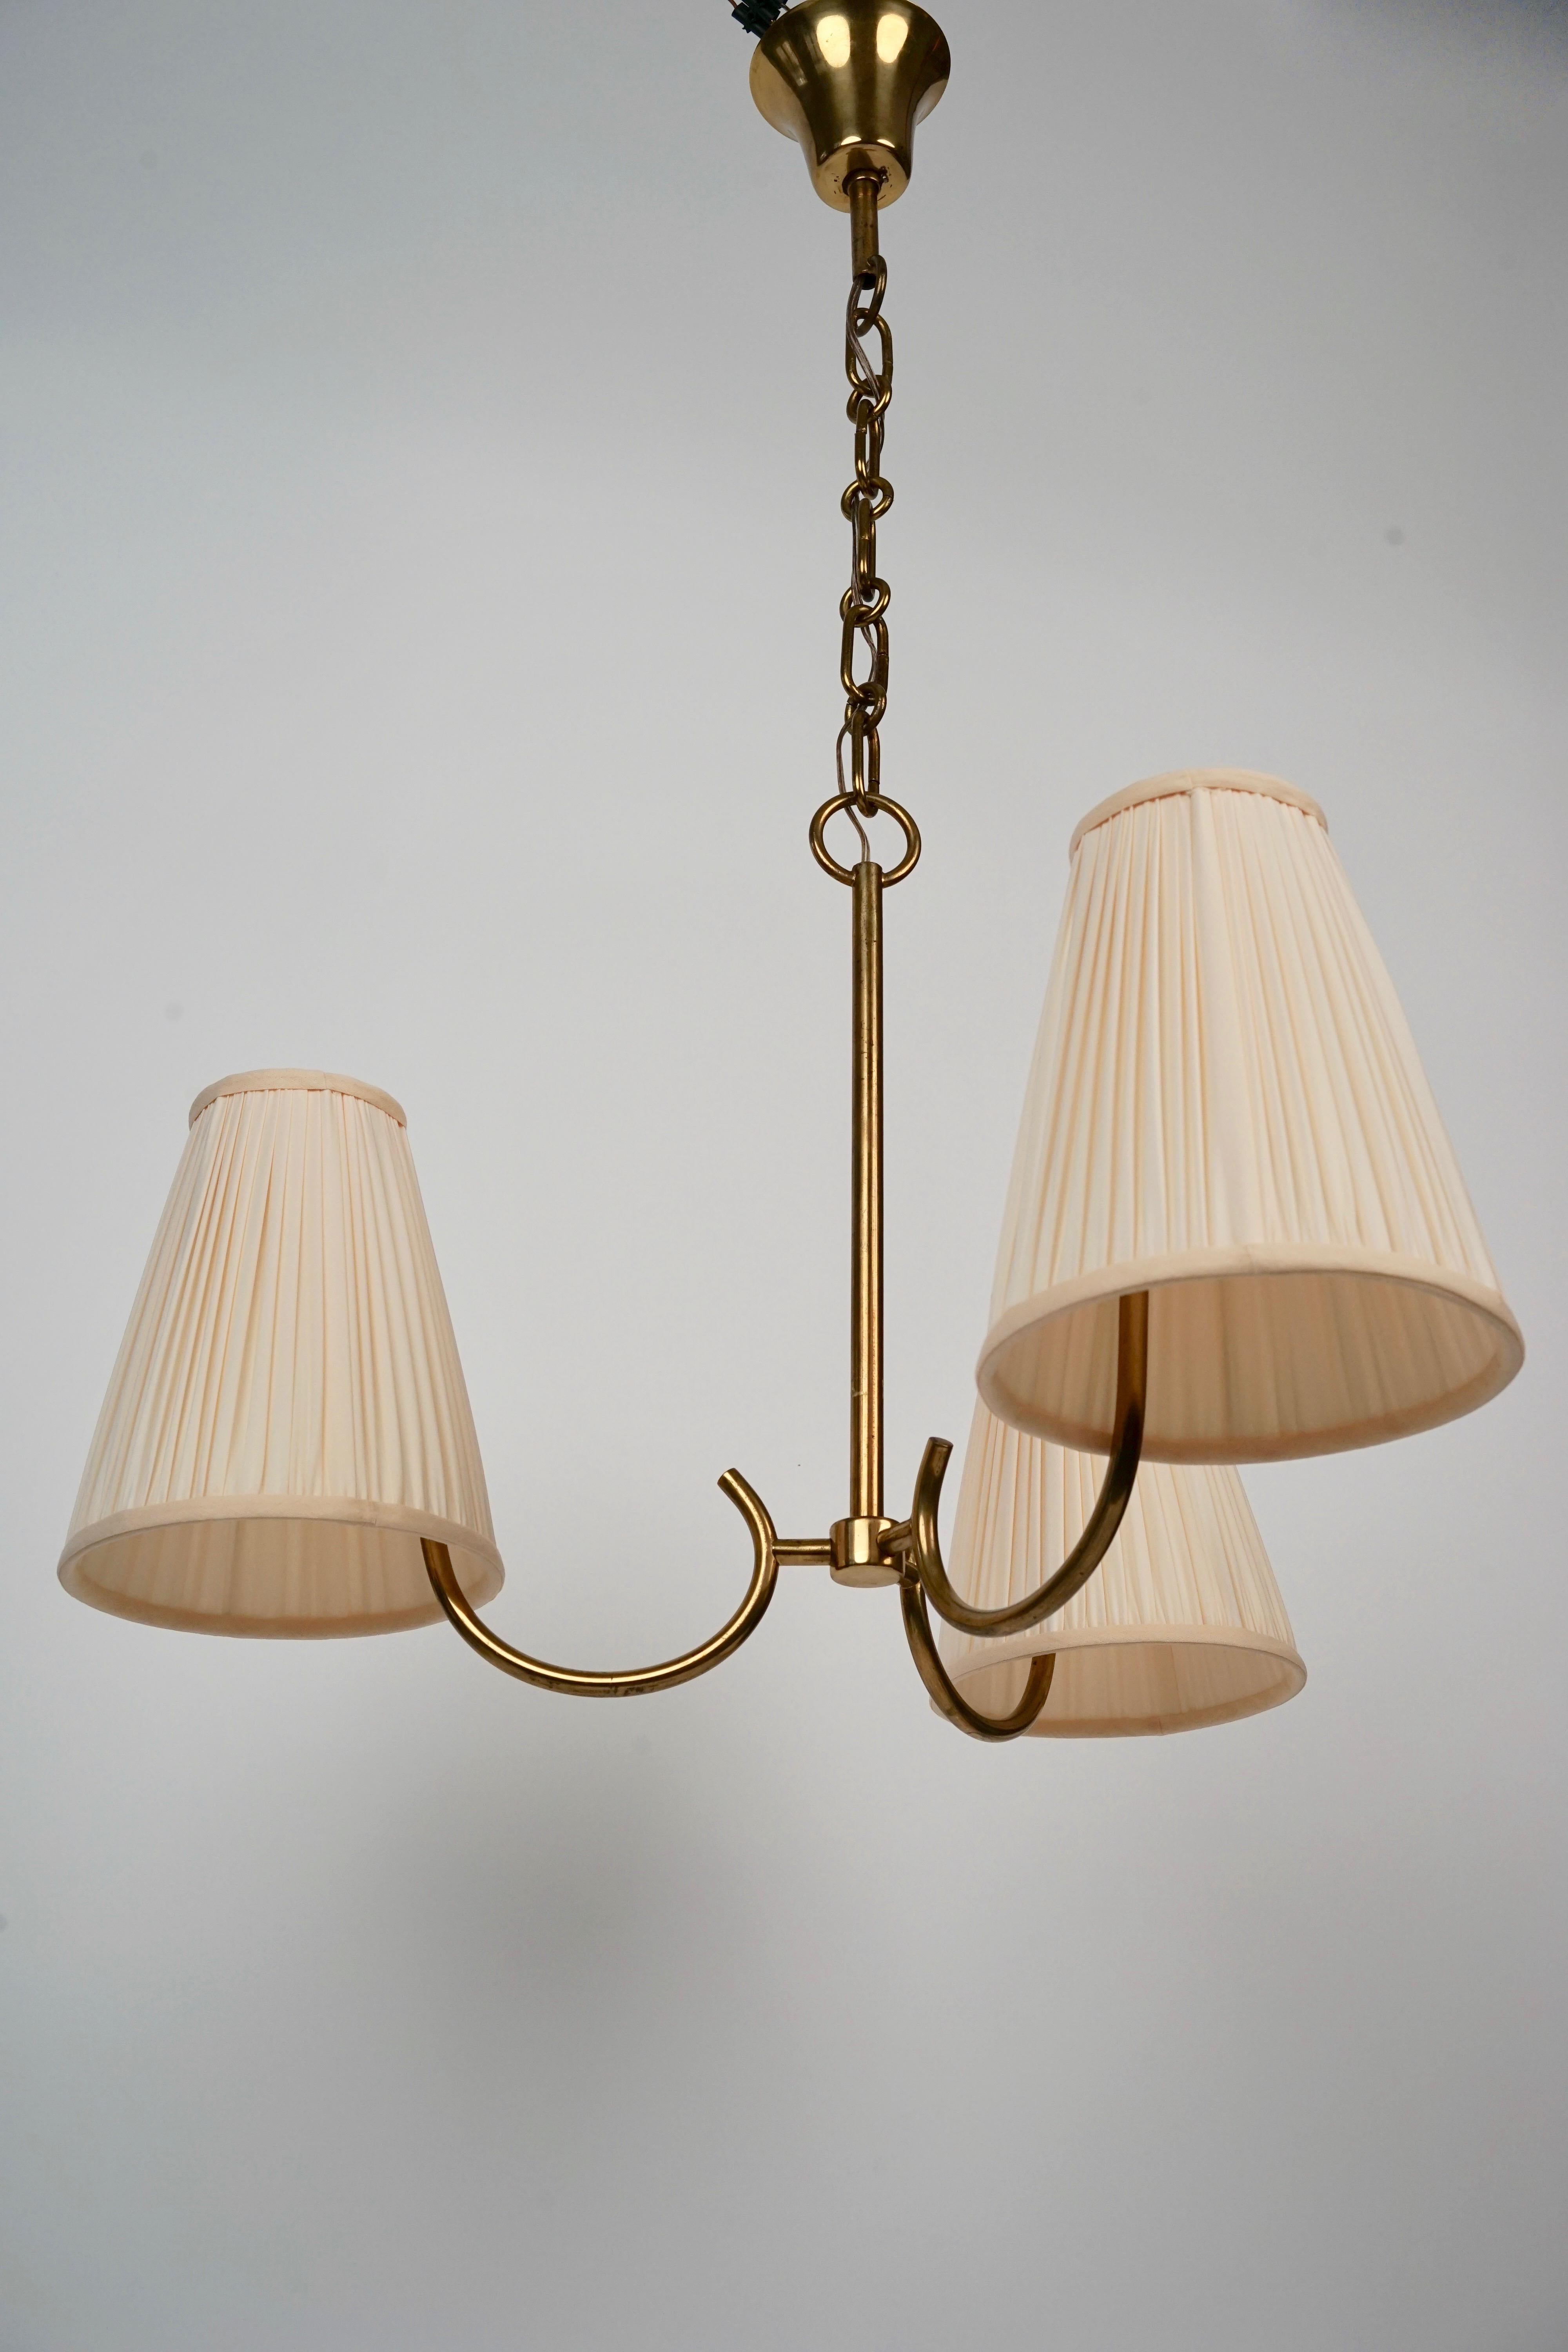 Three arm brass chandelier made in Austria from the firm Rupert Nikoll, in a decorative style from the 1950's. The three arms are decorated with new cream coloured silk shades matching the originals.